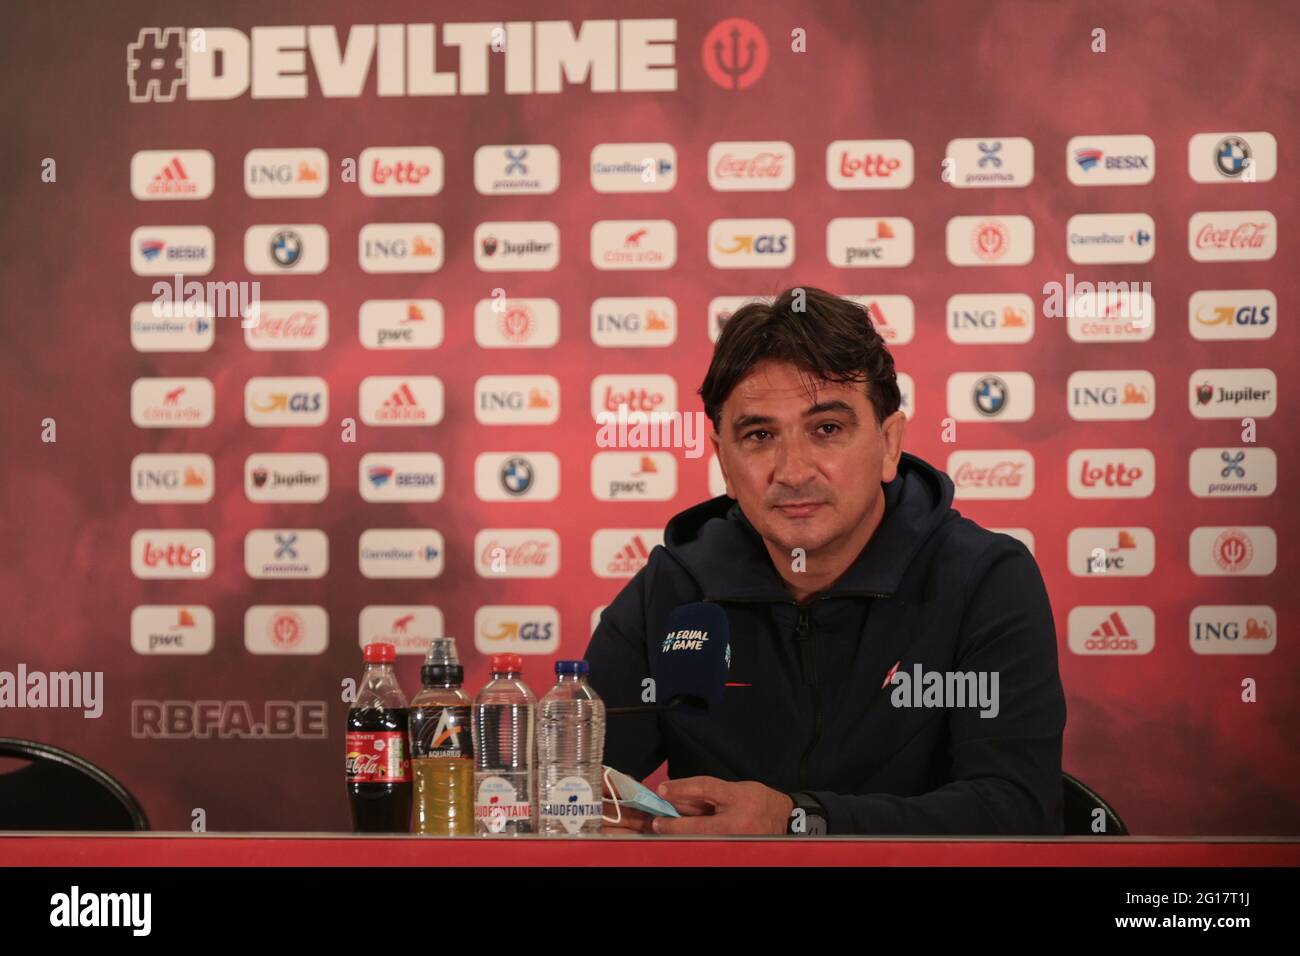 Croatia's head coach Zlatko Dalic pictured during a press conference of the national soccer team of Croatia, on Saturday 05 June 2021 in Brussels. Tom Stock Photo